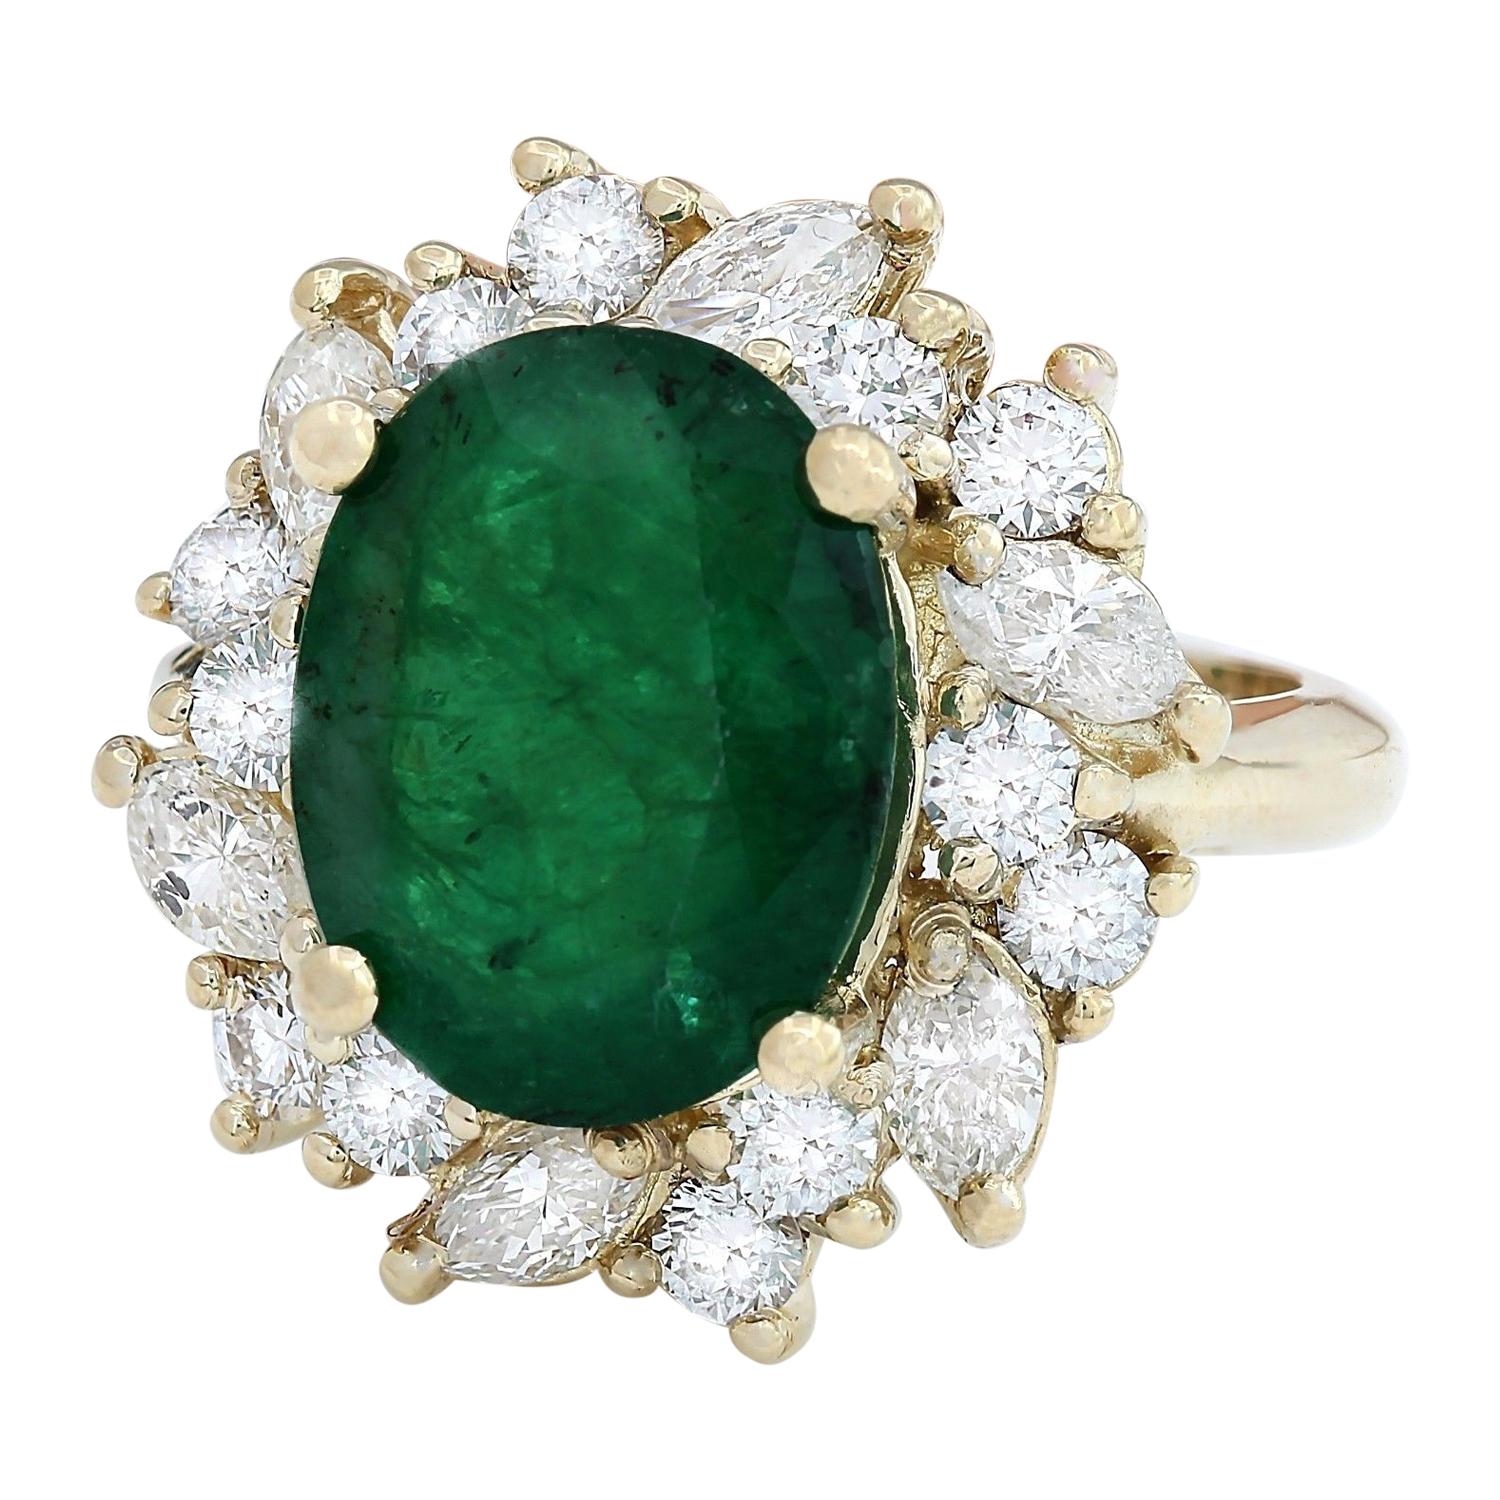 Indulge in timeless elegance with our exquisite 14K Solid Yellow Gold Diamond Ring, showcasing a stunning 6.94 Carat Emerald as its centerpiece. Meticulously crafted from 14K yellow gold, this ring boasts a total metal weight of 6.5 grams, ensuring